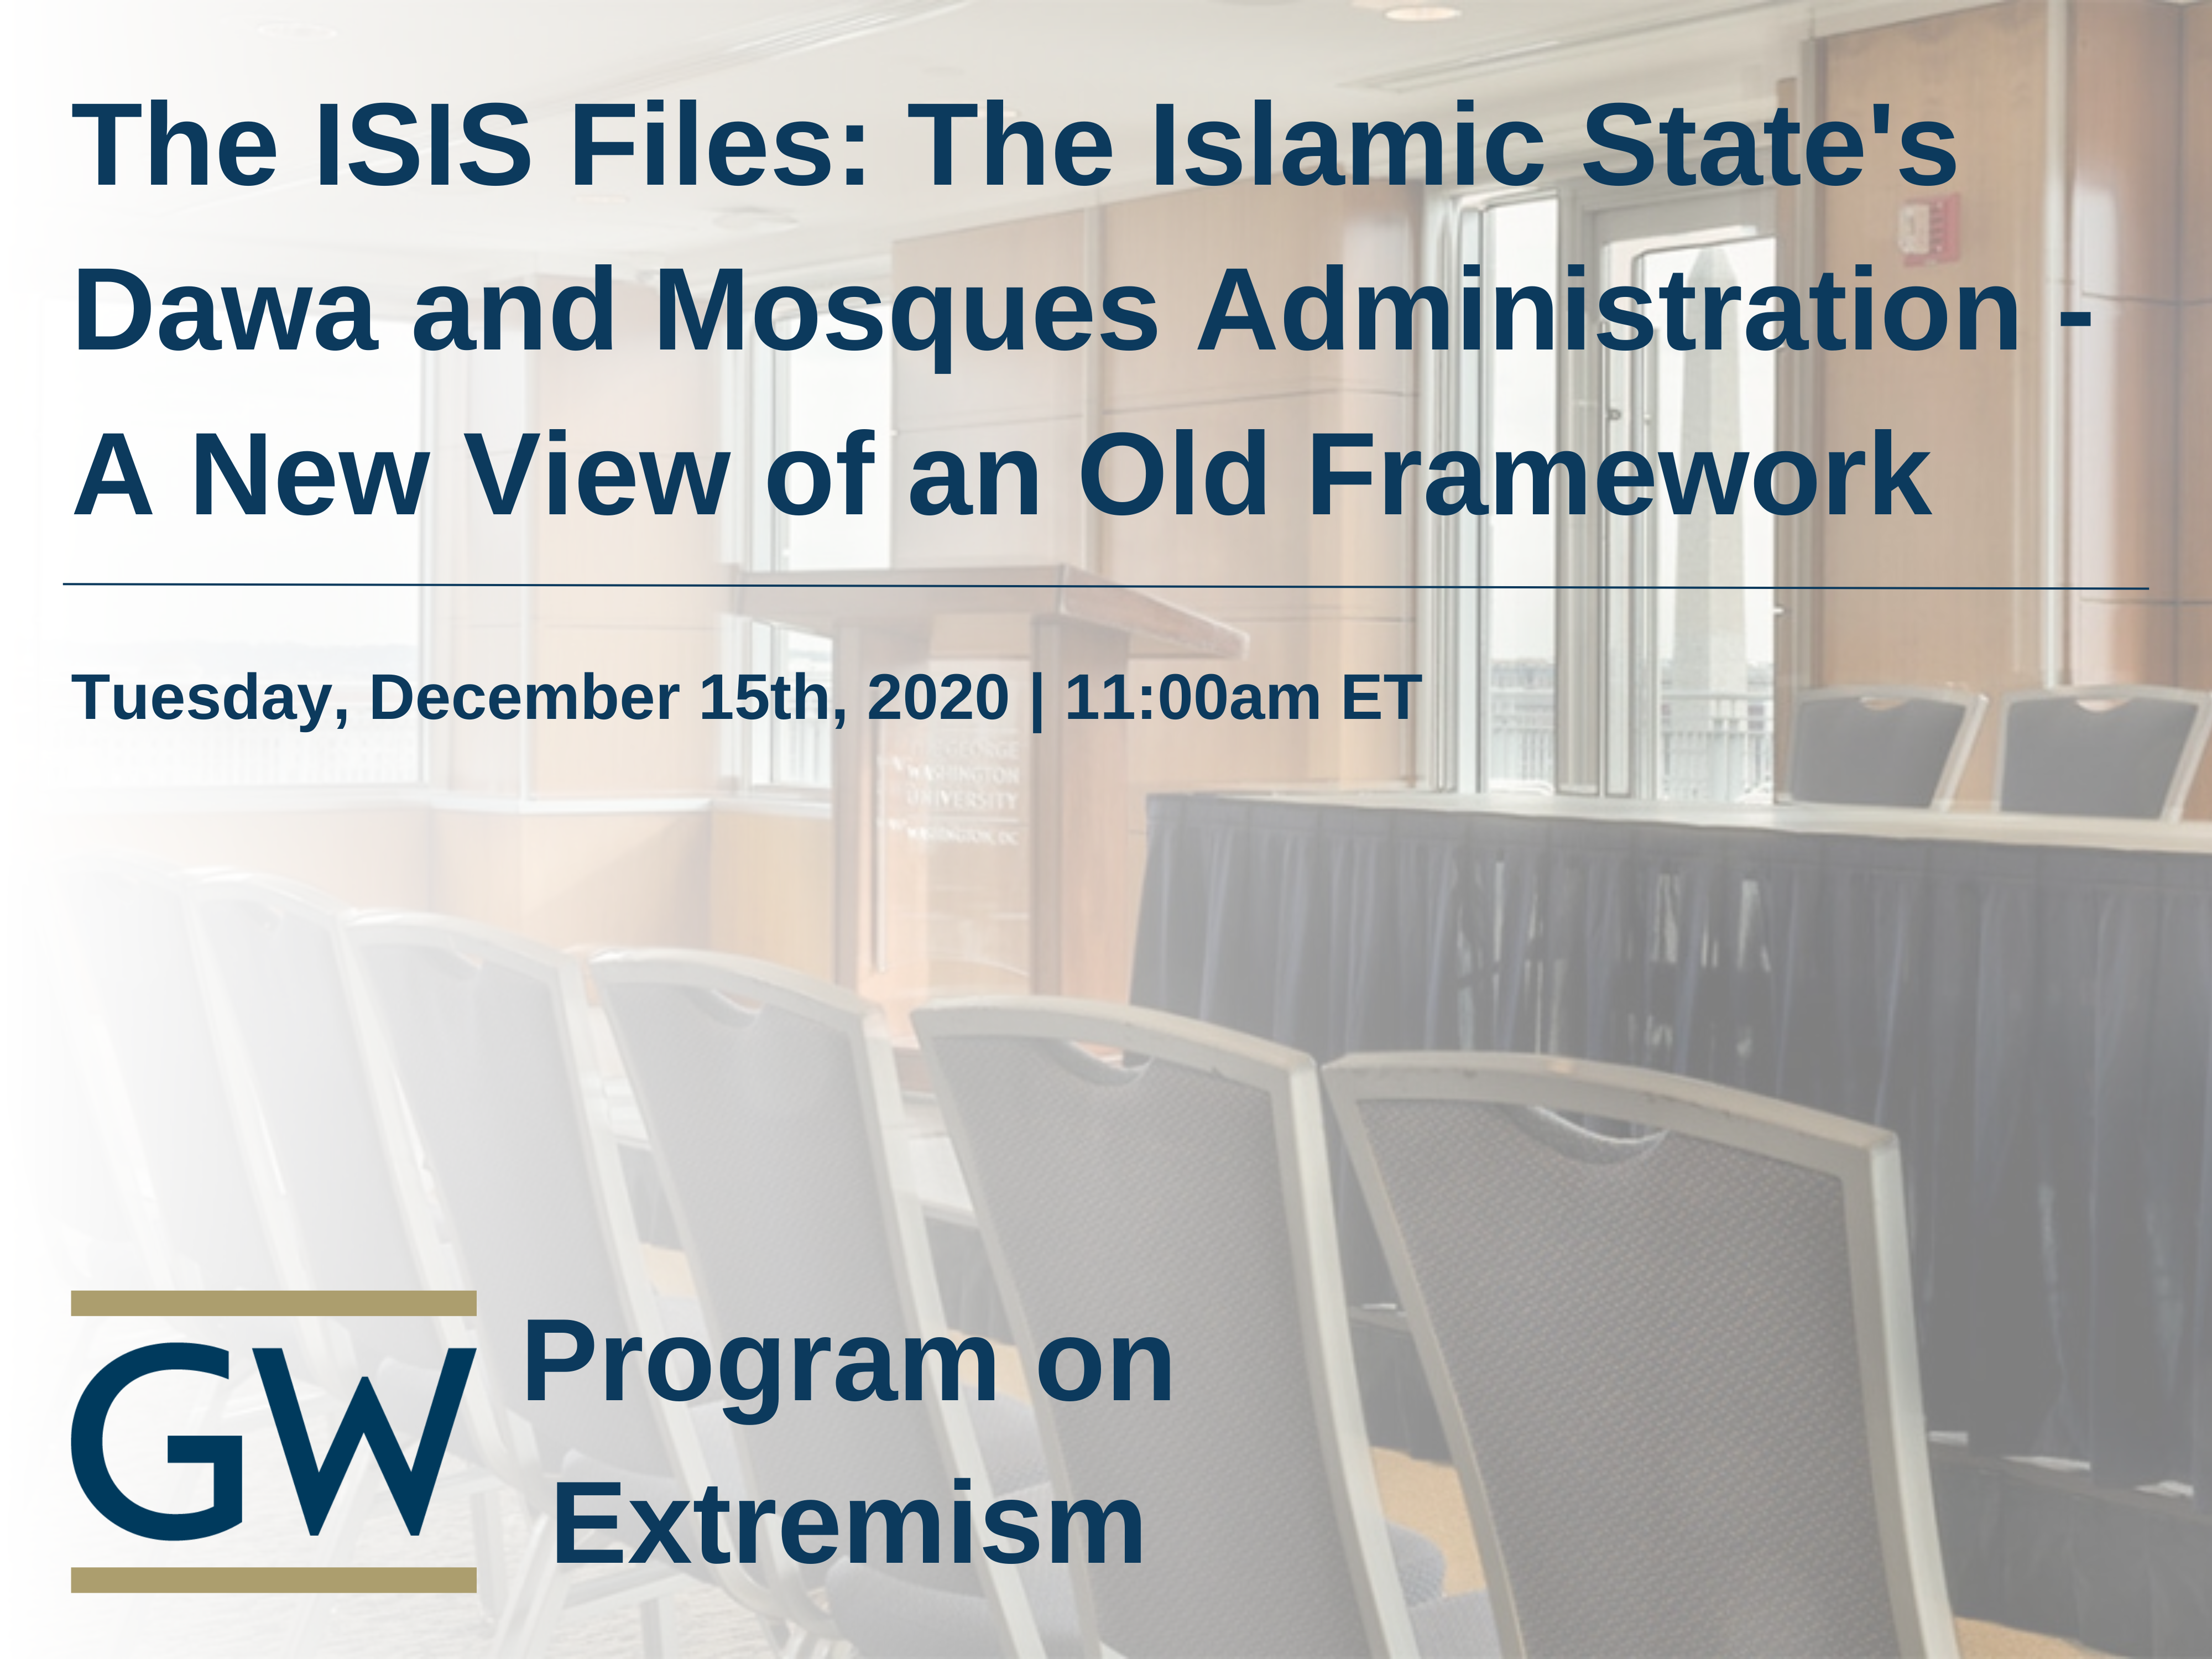 The ISIS Files: The Islamic State’s Dawa and Mosques Administration - A New View of an Old Framework  Event Banner